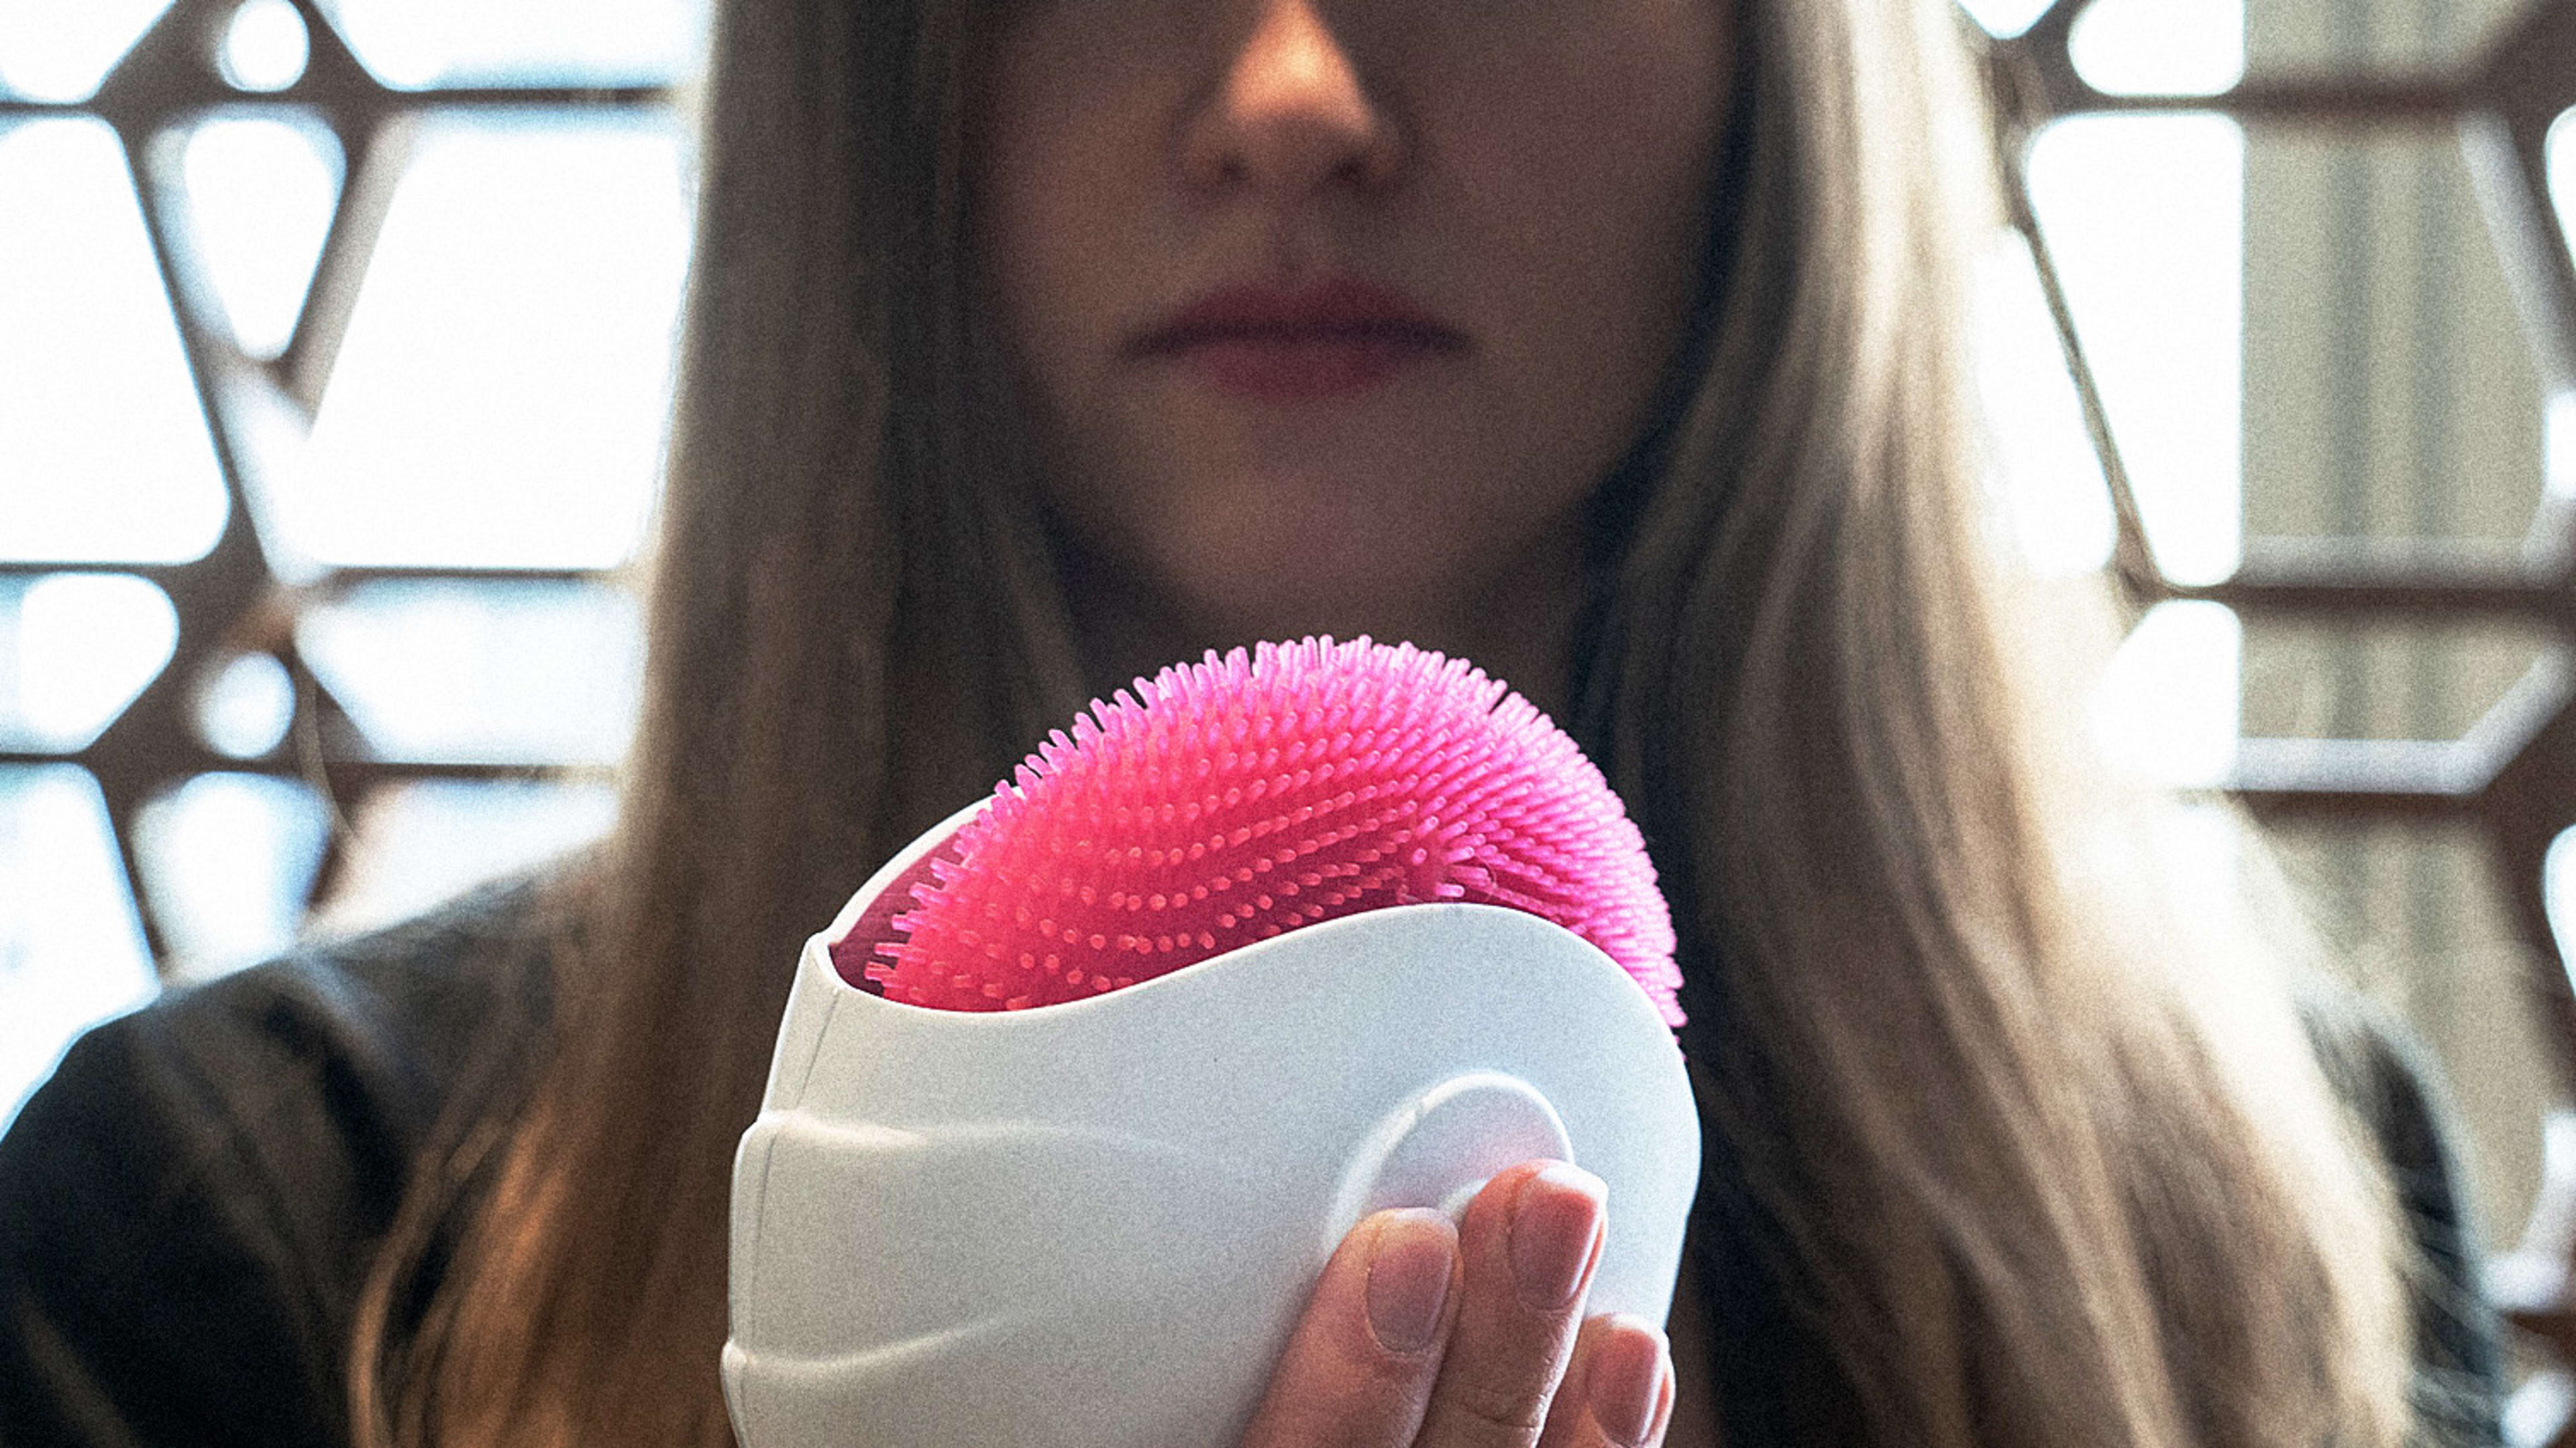 This portable personal cleaning device mimics a cat’s tongue